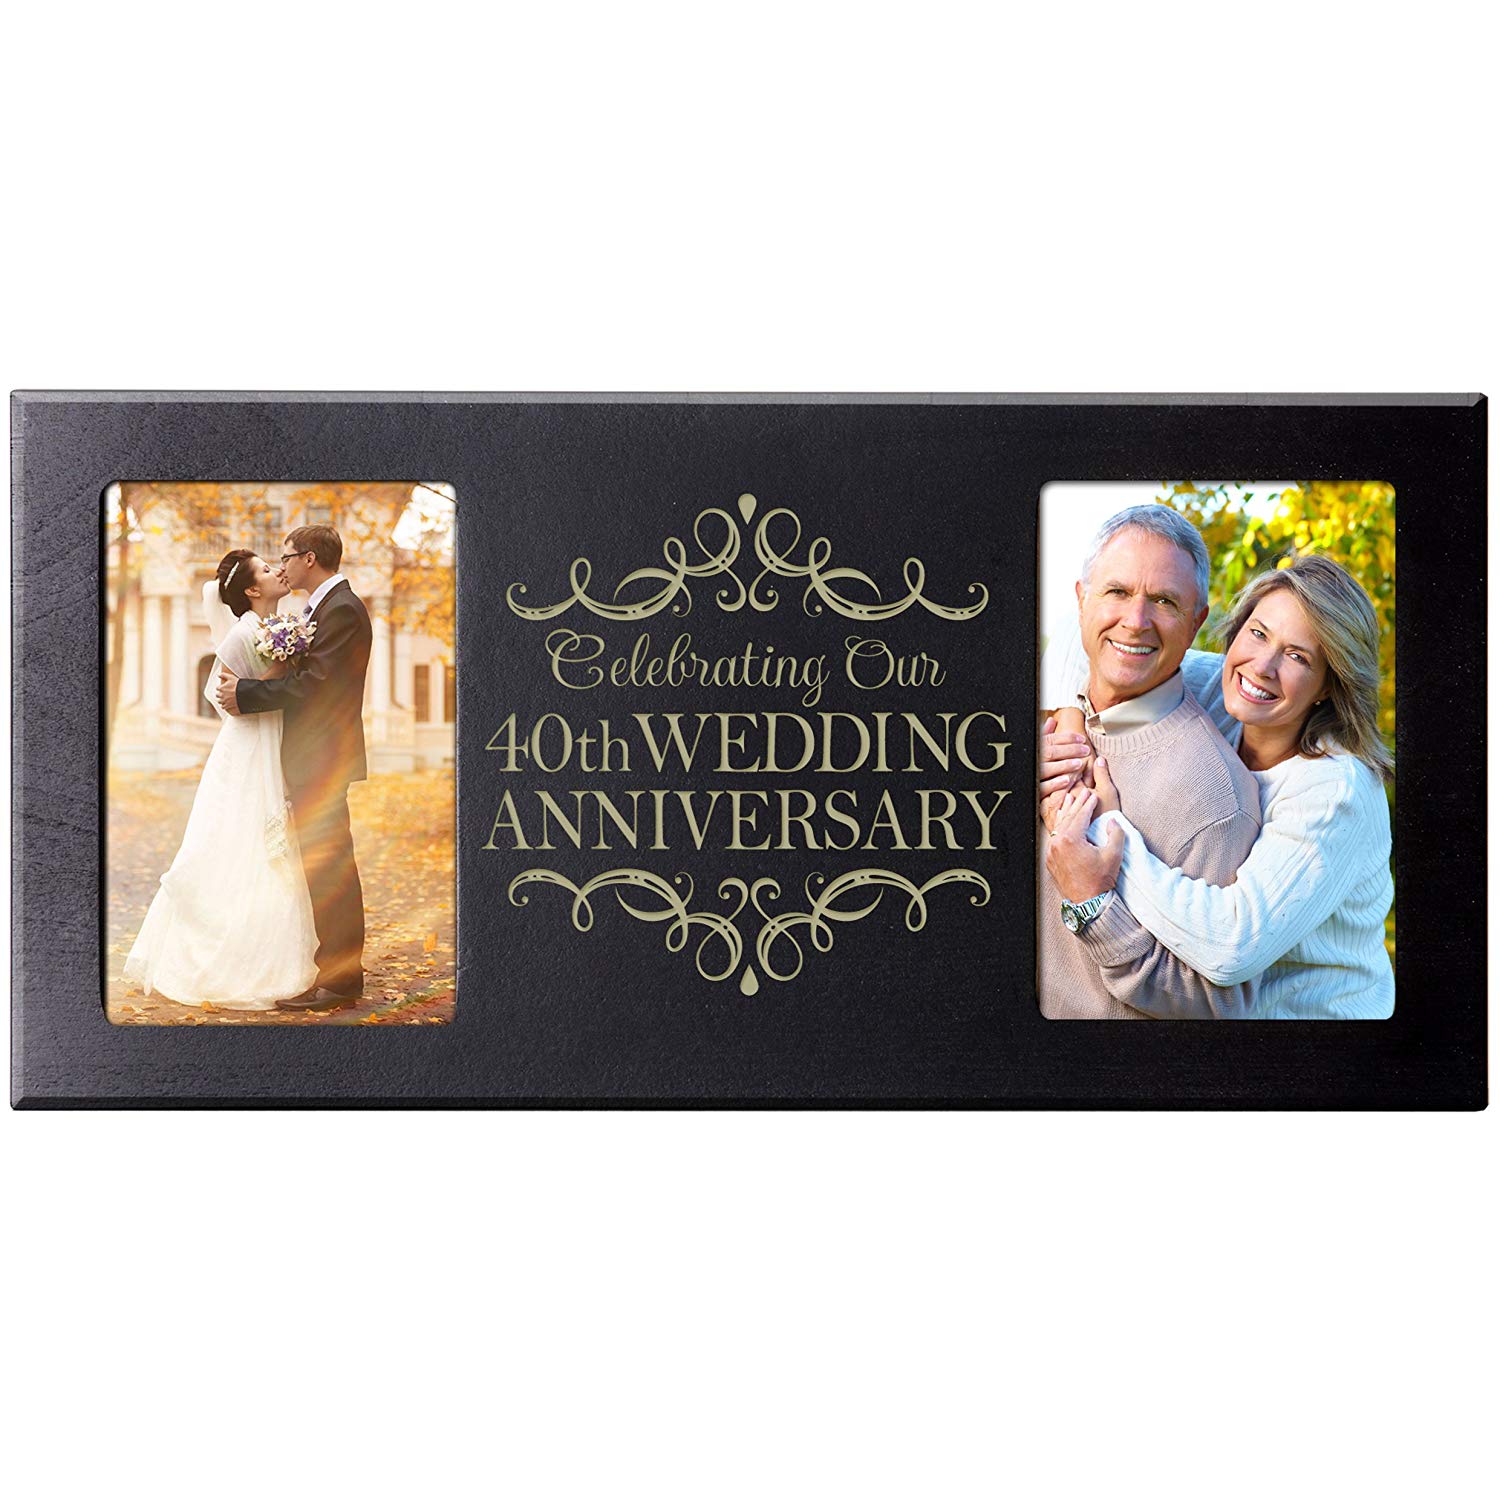  40th Wedding Anniversary Picture Frame 8x16in Celebrating Holds Two 4x6in Photos - LifeSong Milestones